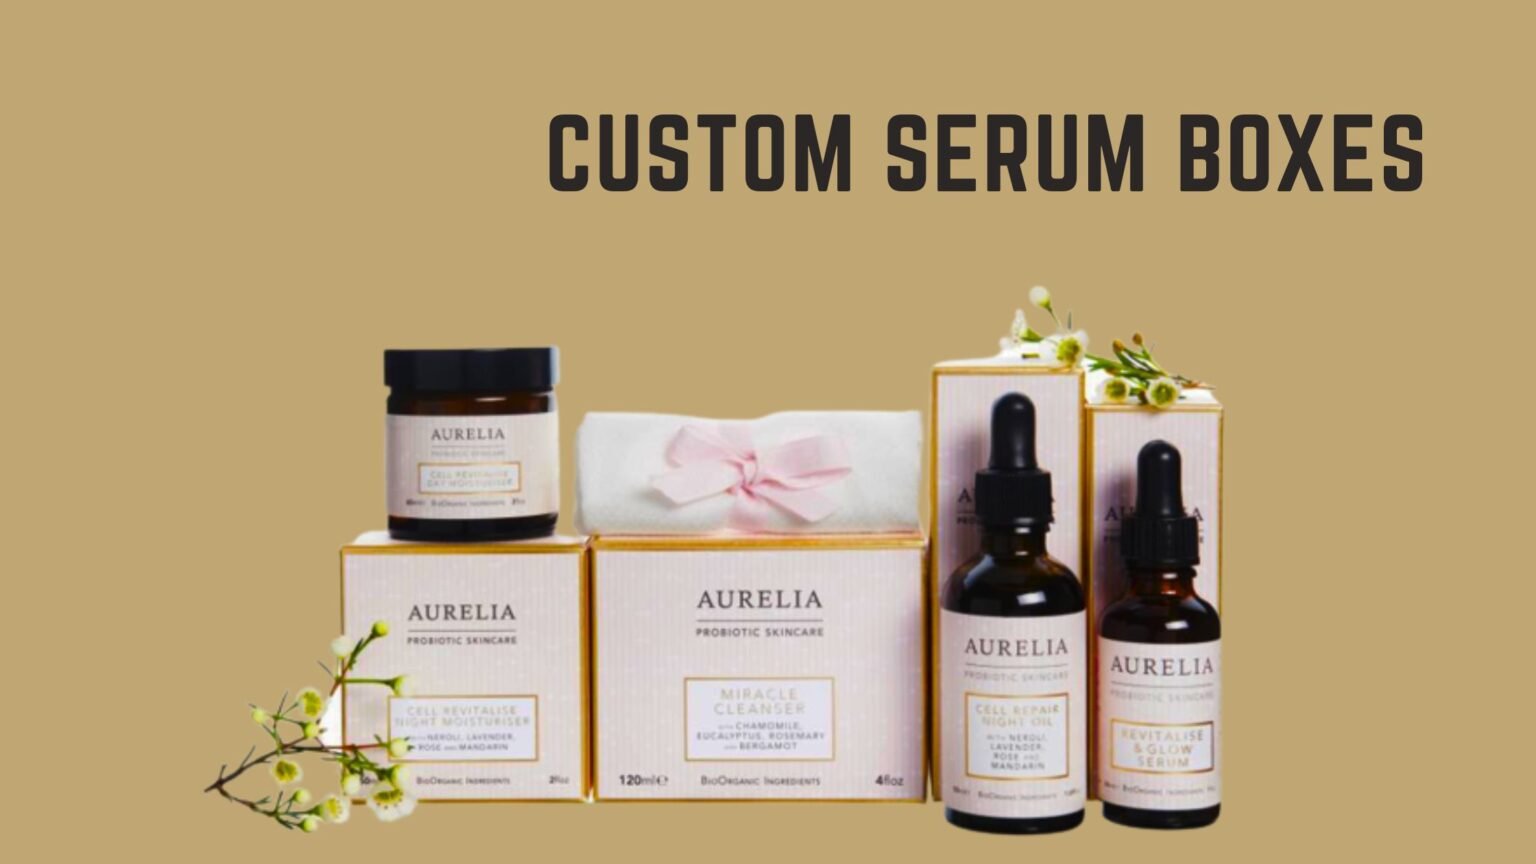 Custom Serum Boxes Protect Your Product During Shipping and Ensure Customer Satisfaction